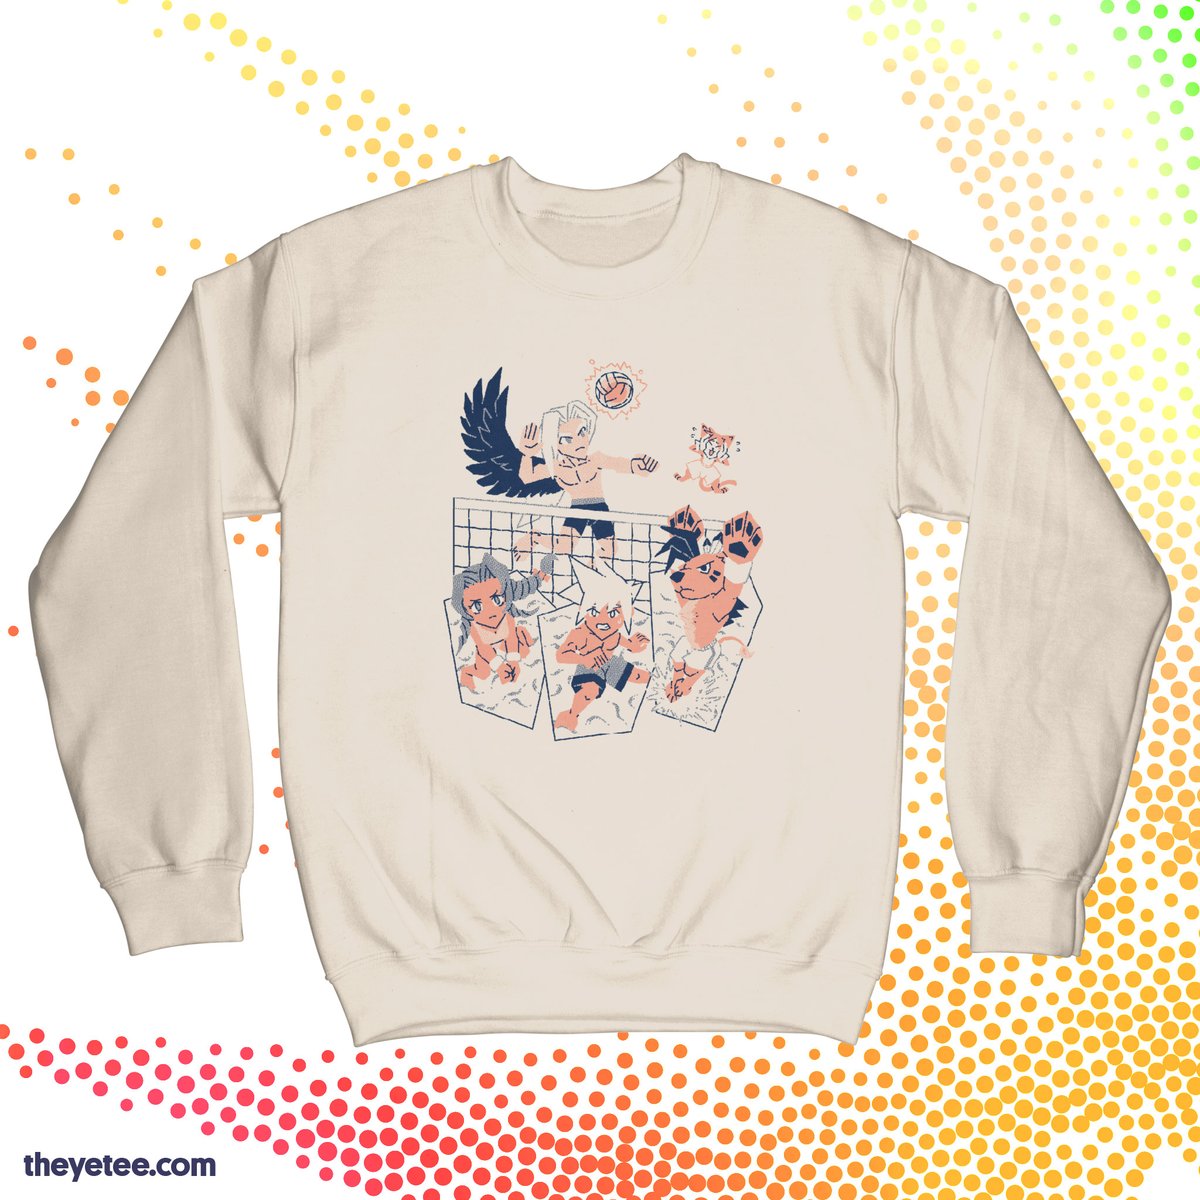 「Here comes the spike! *waits through 5 m」|The Yetee 🌈のイラスト